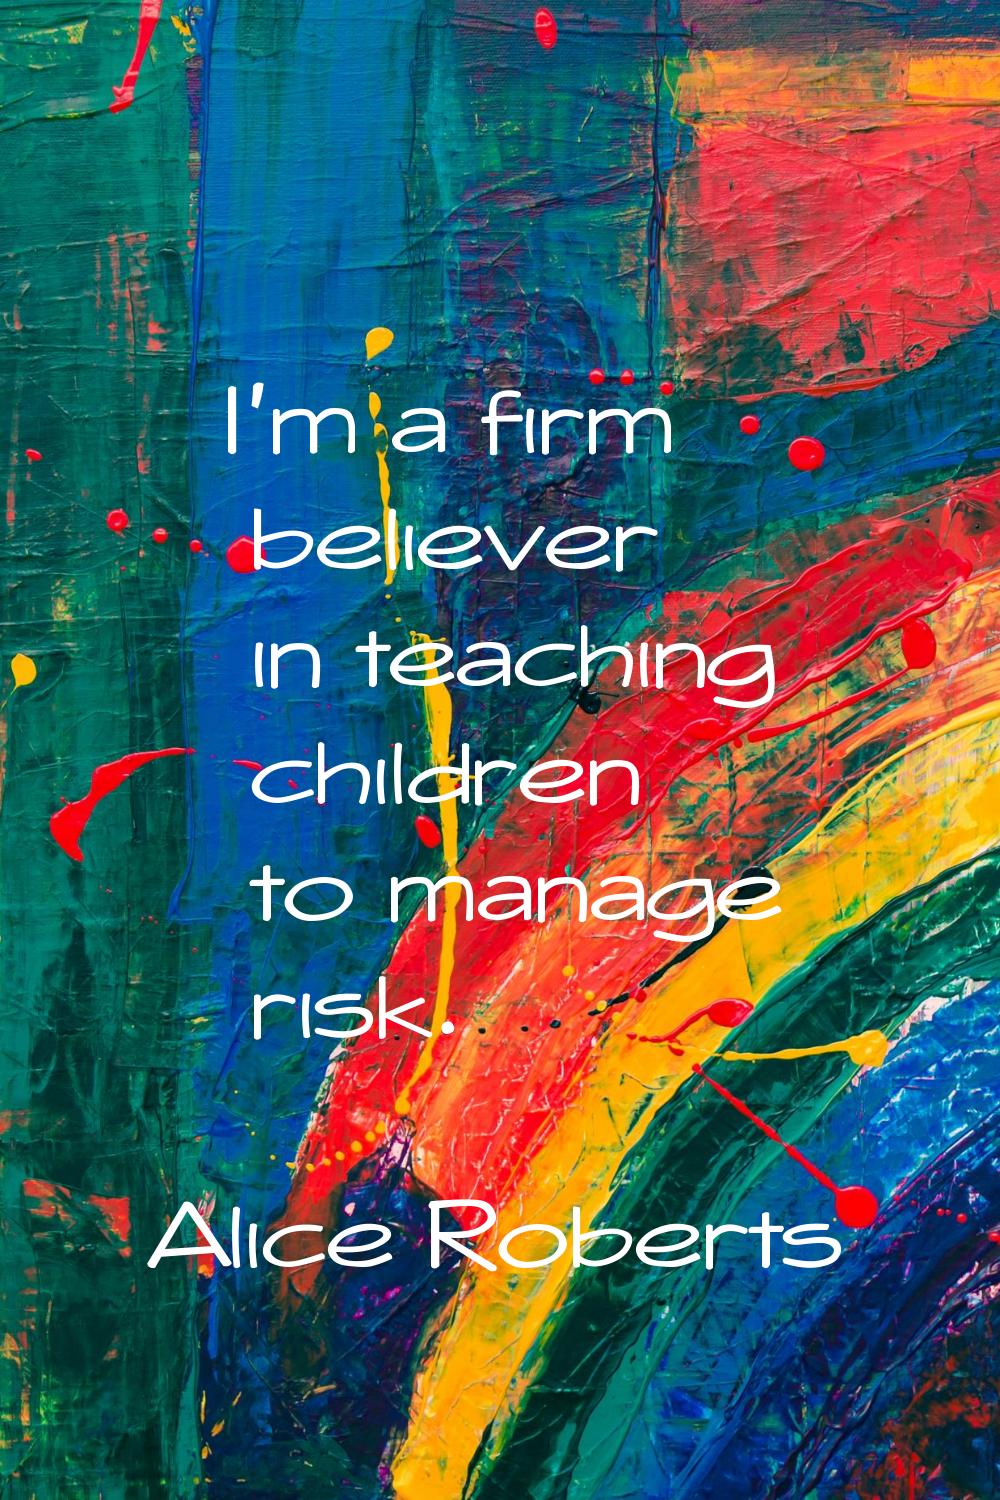 I’m a firm believer in teaching children to manage risk.